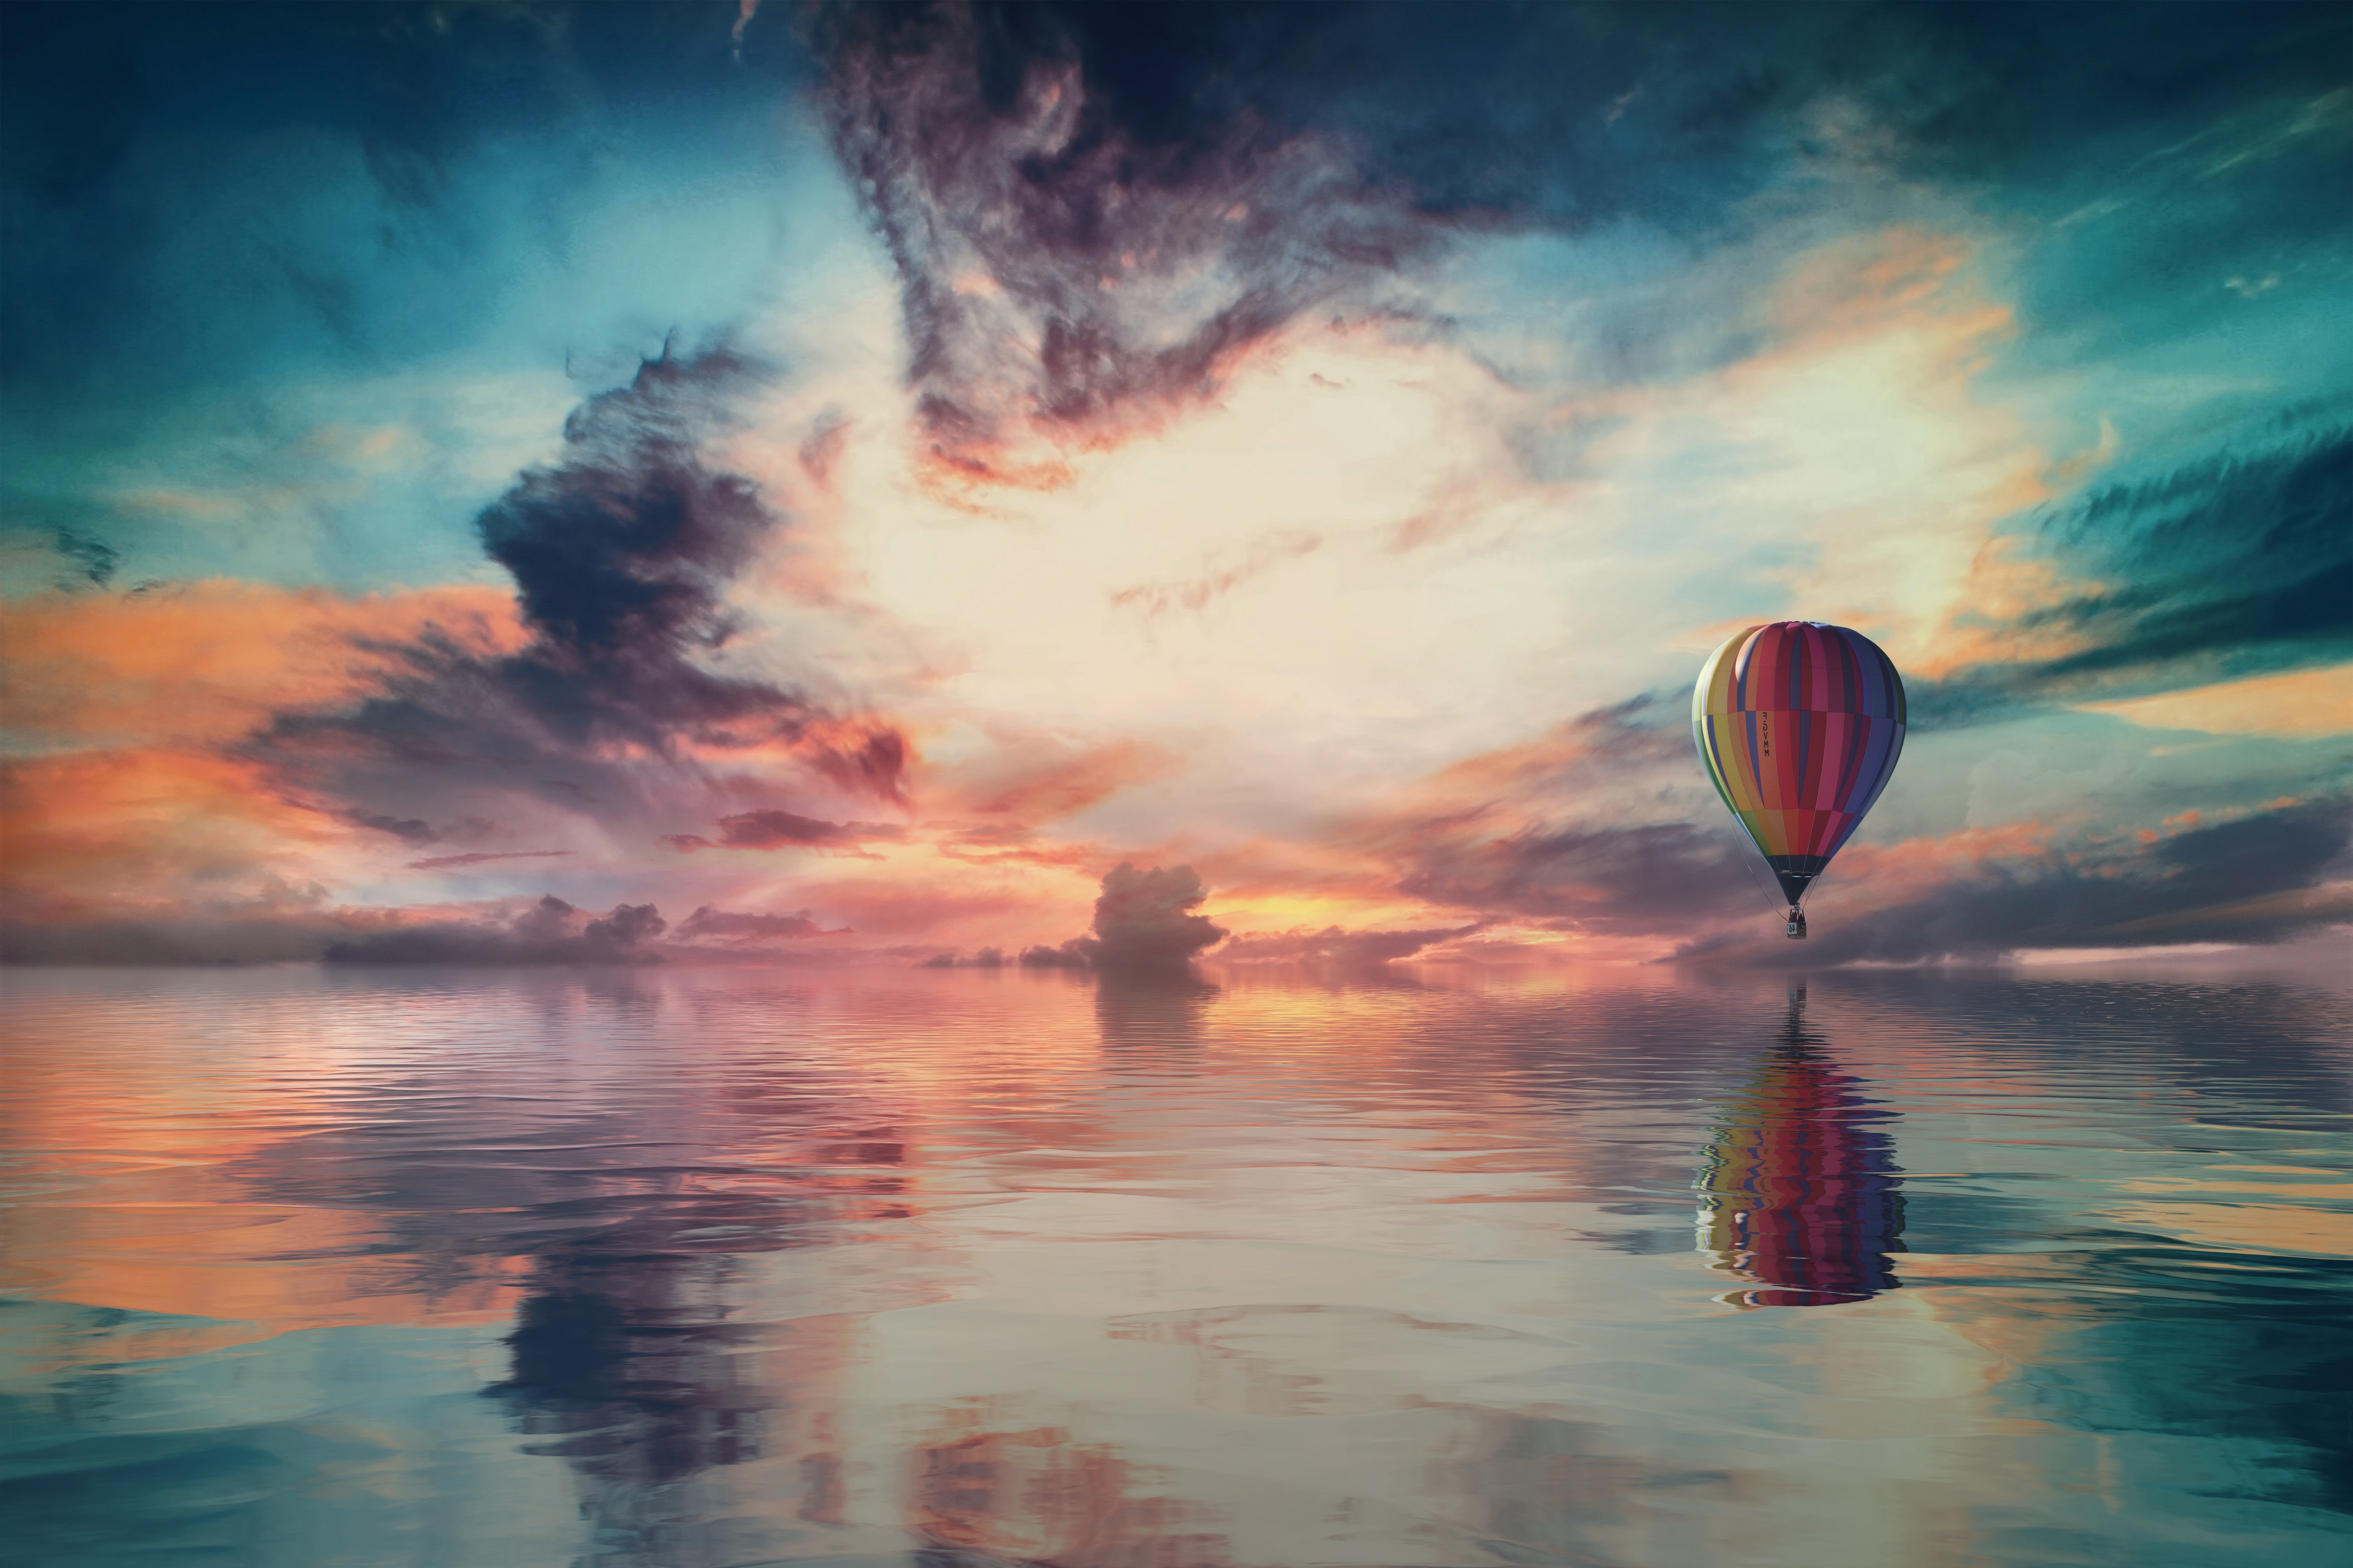 HD wallpaper, Clouds, Hot Air Balloon, Aesthetic, Reflection, 8K, Water, Multicolor, Colorful Sky, 5K, Sky View